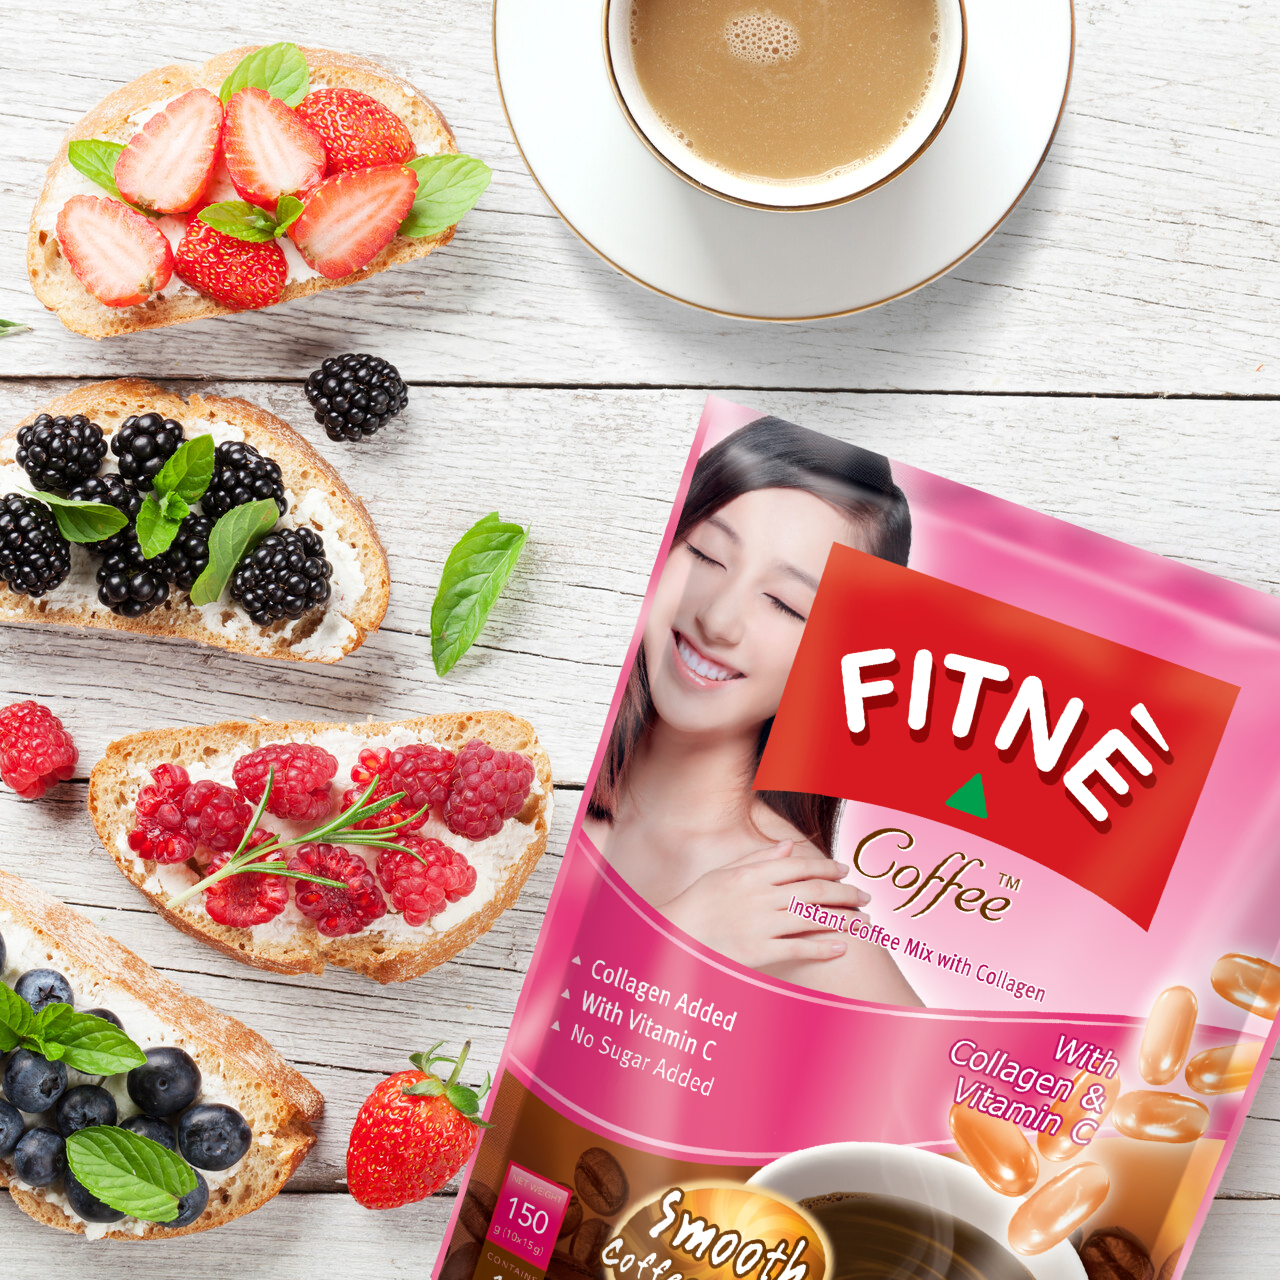 FITNE Instant 3 In 1 Coffee Packets Mix With Natural Hydrolyzed Collagen  Vitamin C Smooth Blend Tasty Aromatic No Sugar Sucralose Sweetener, 10  Sticks